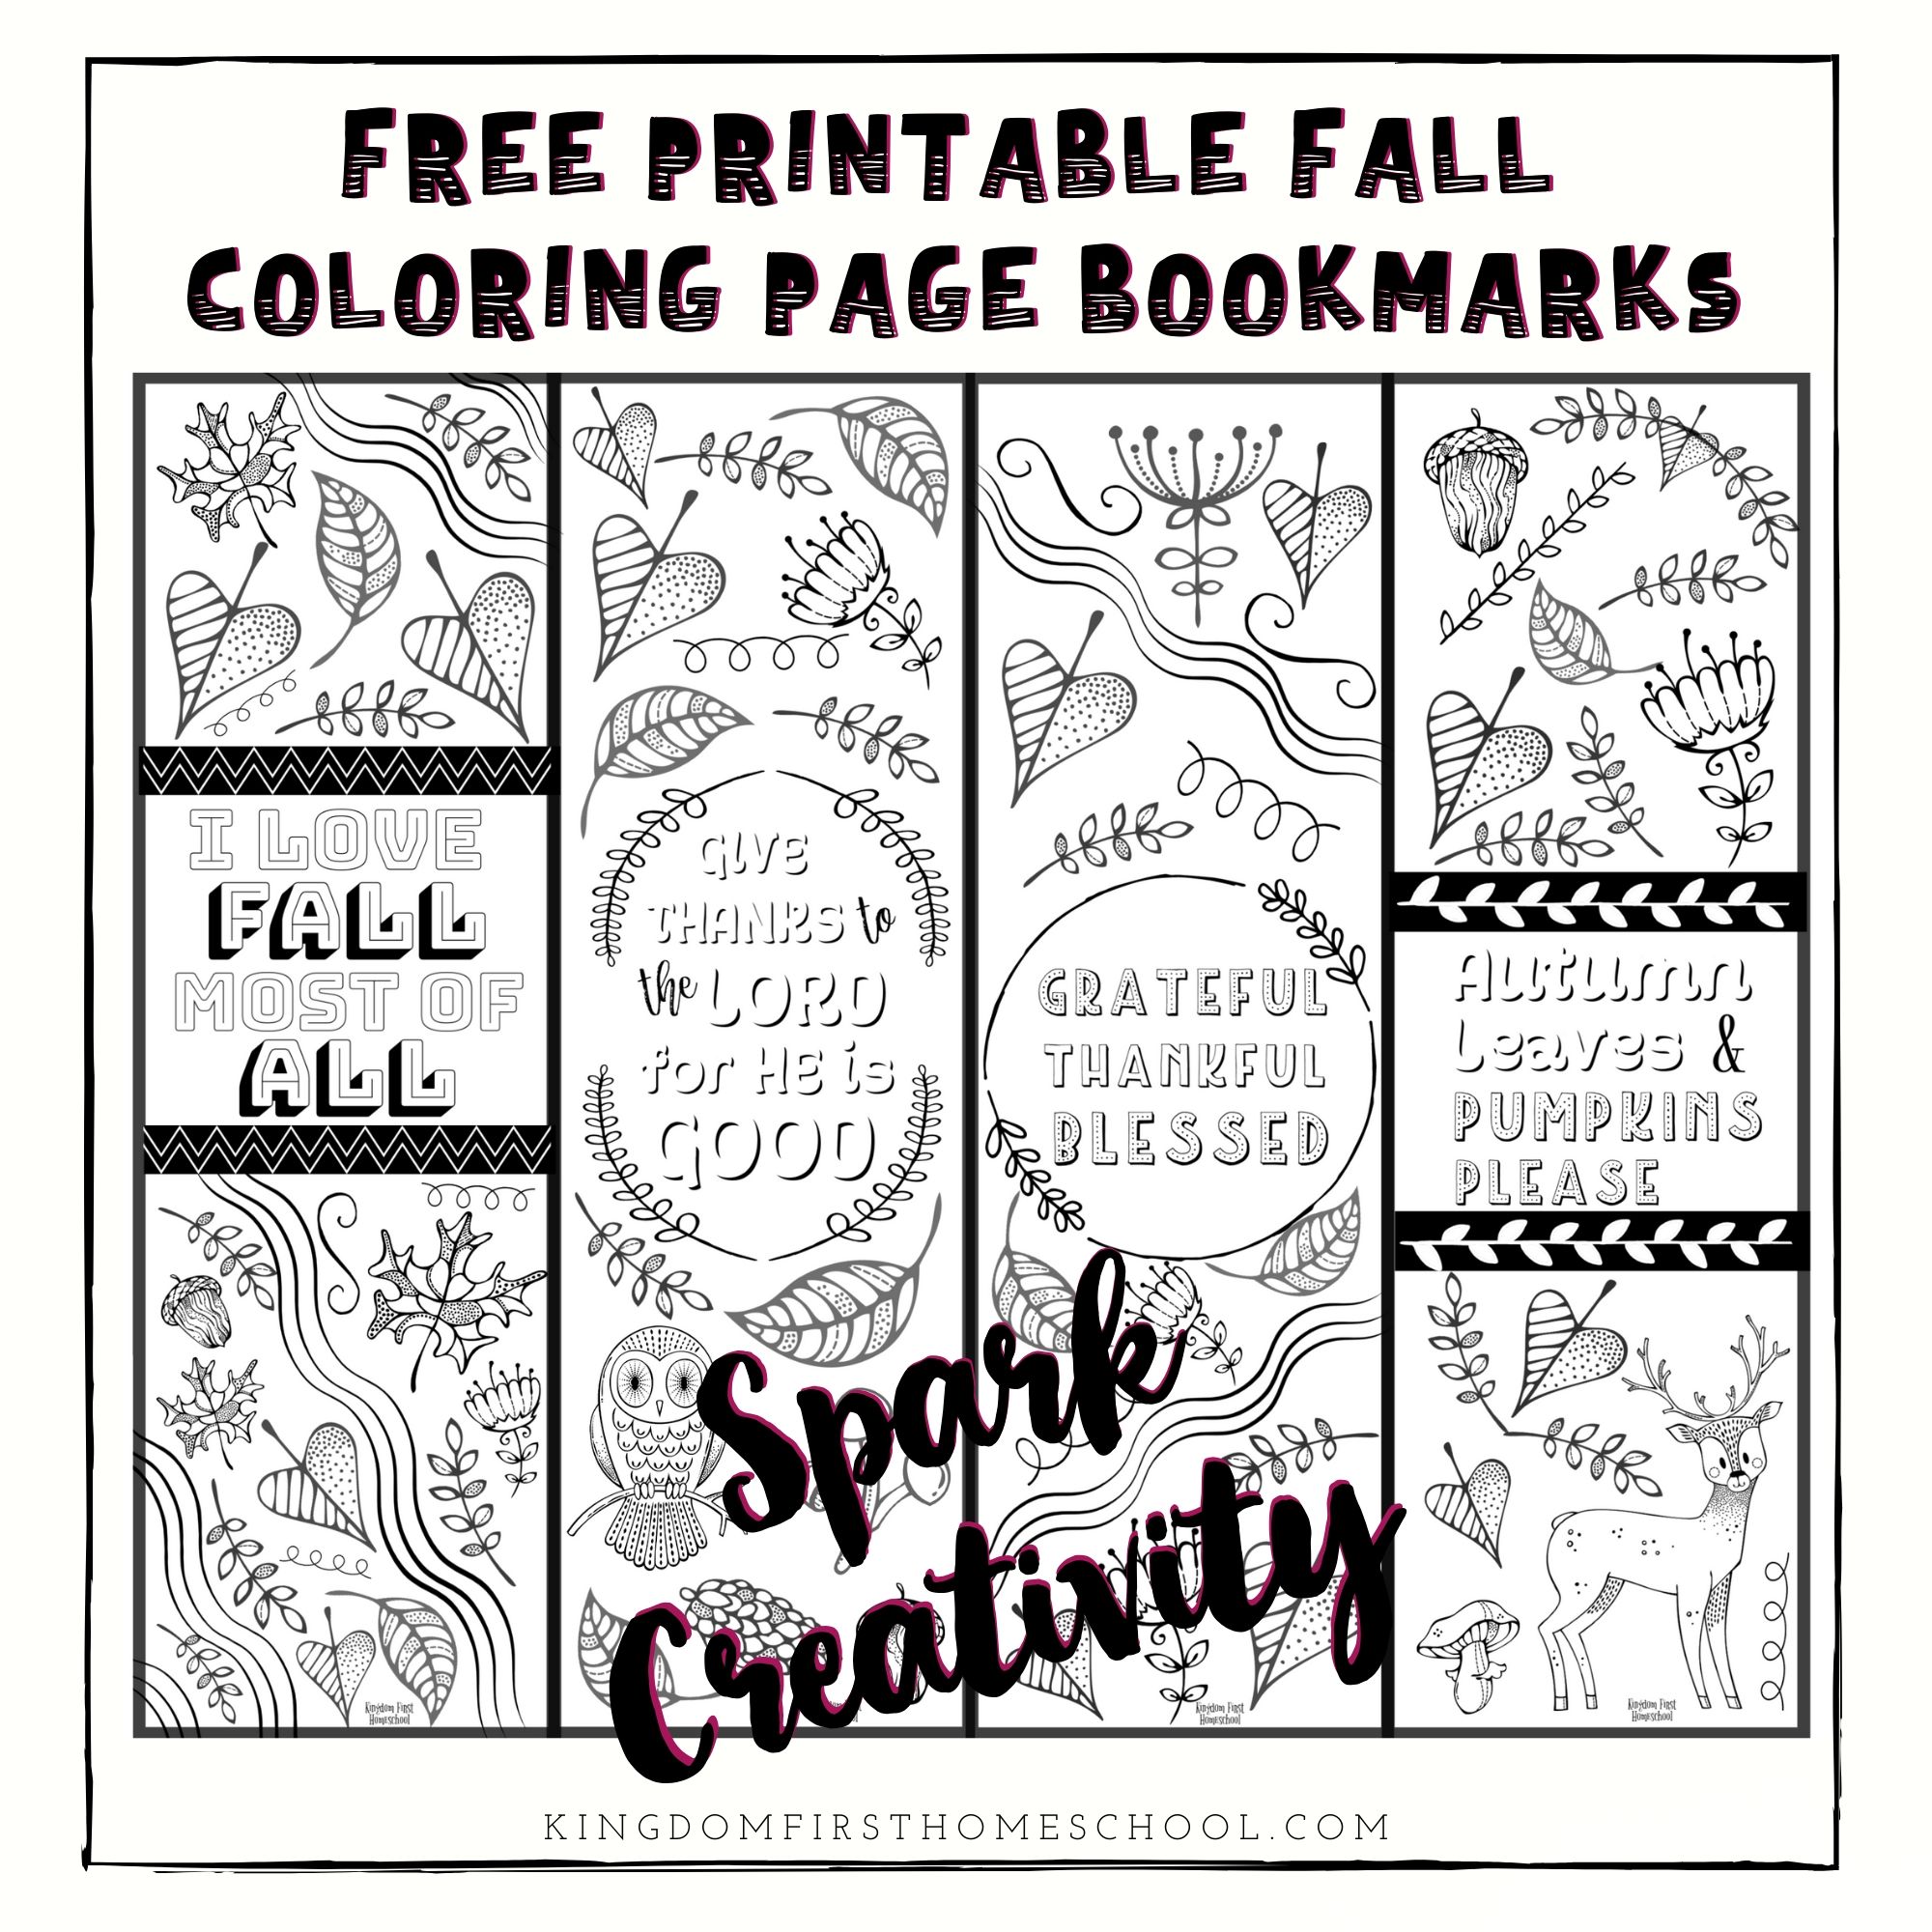 Gorgeous Free Fall Printable Coloring Page Bookmarks